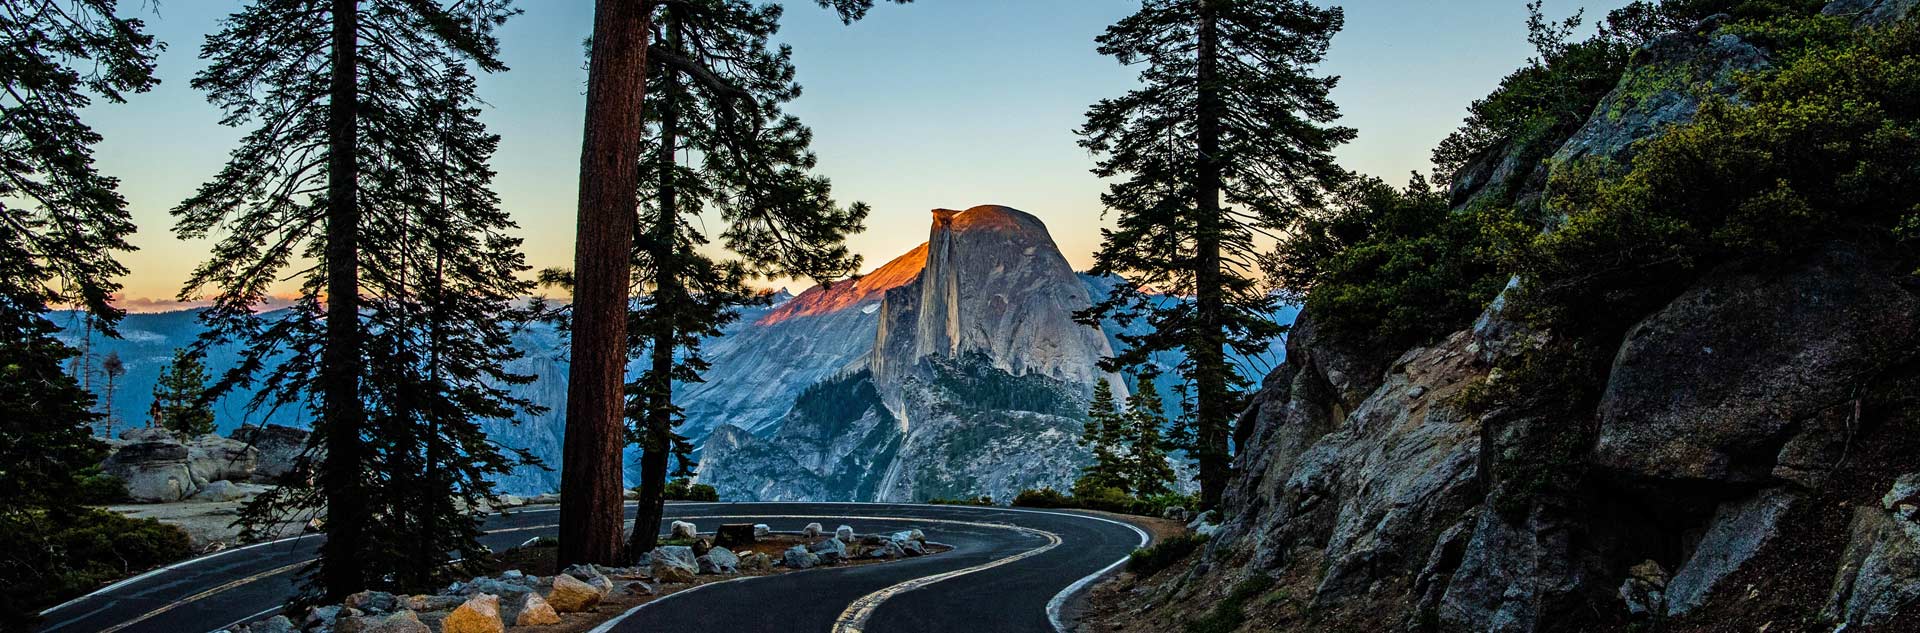 A view of Half Dome from a Yosemite National Park roadway